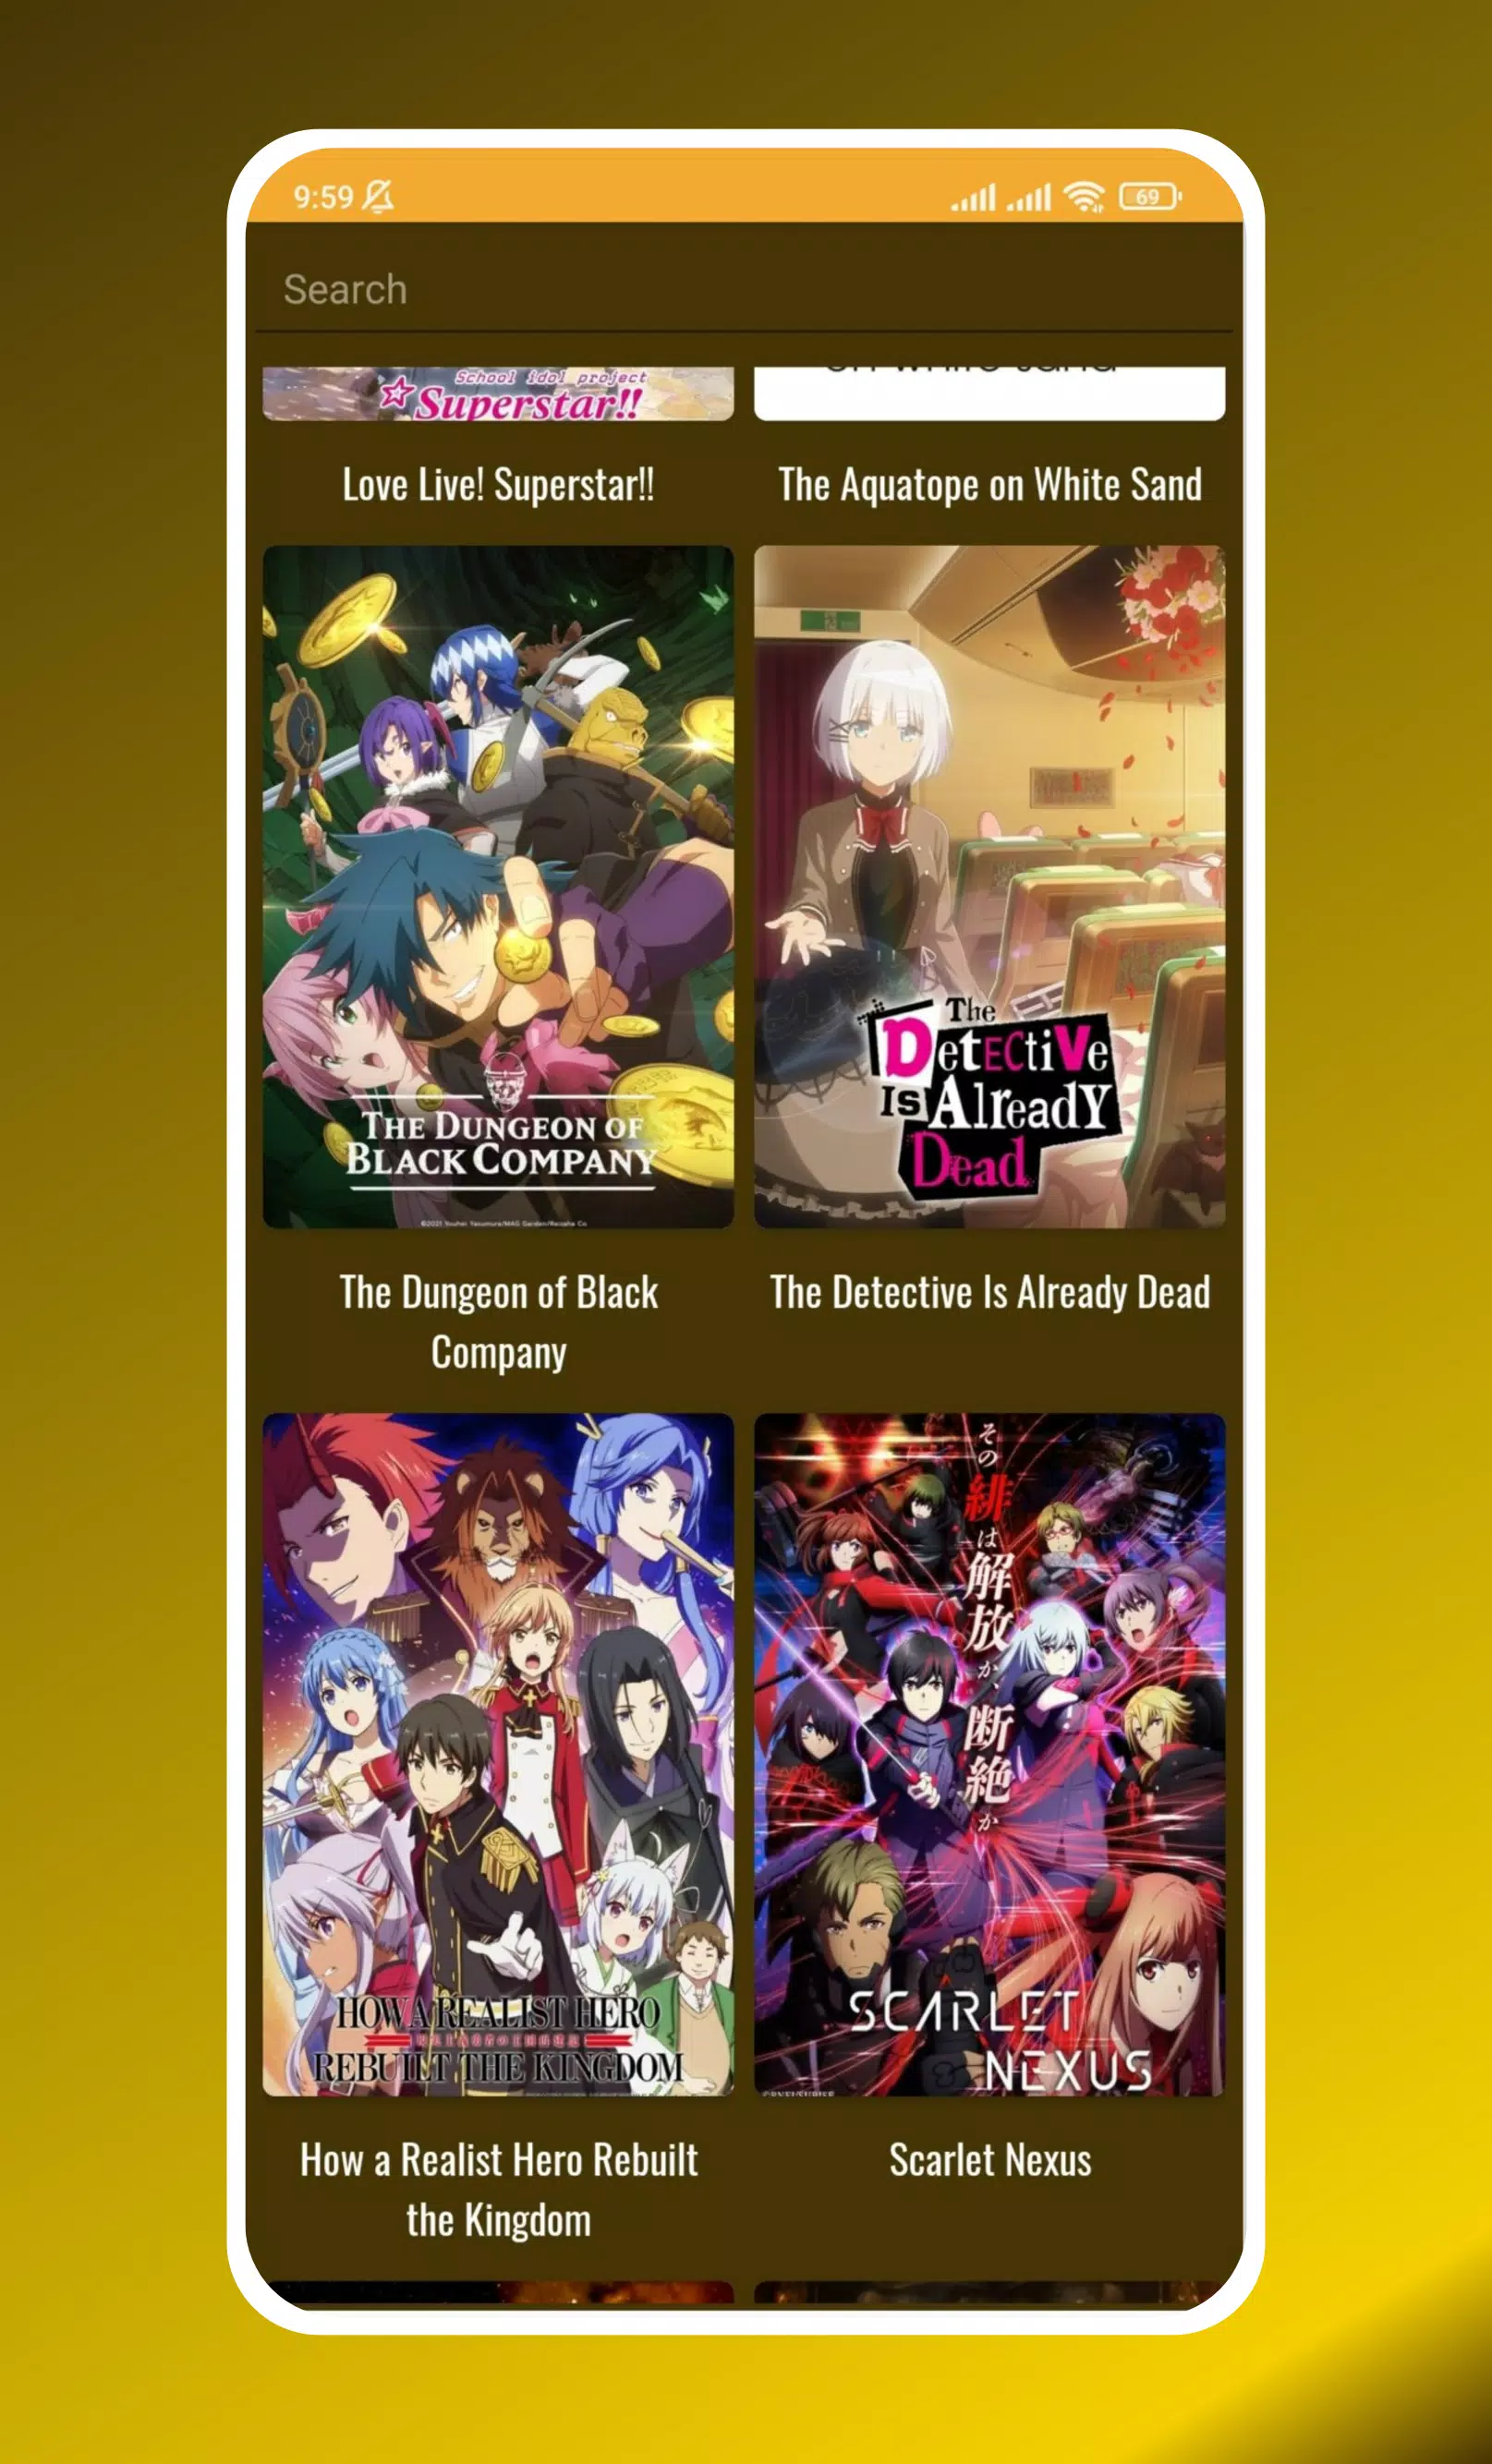 Anime tv - Anime Tv Online HD Apk Download for Android- Latest